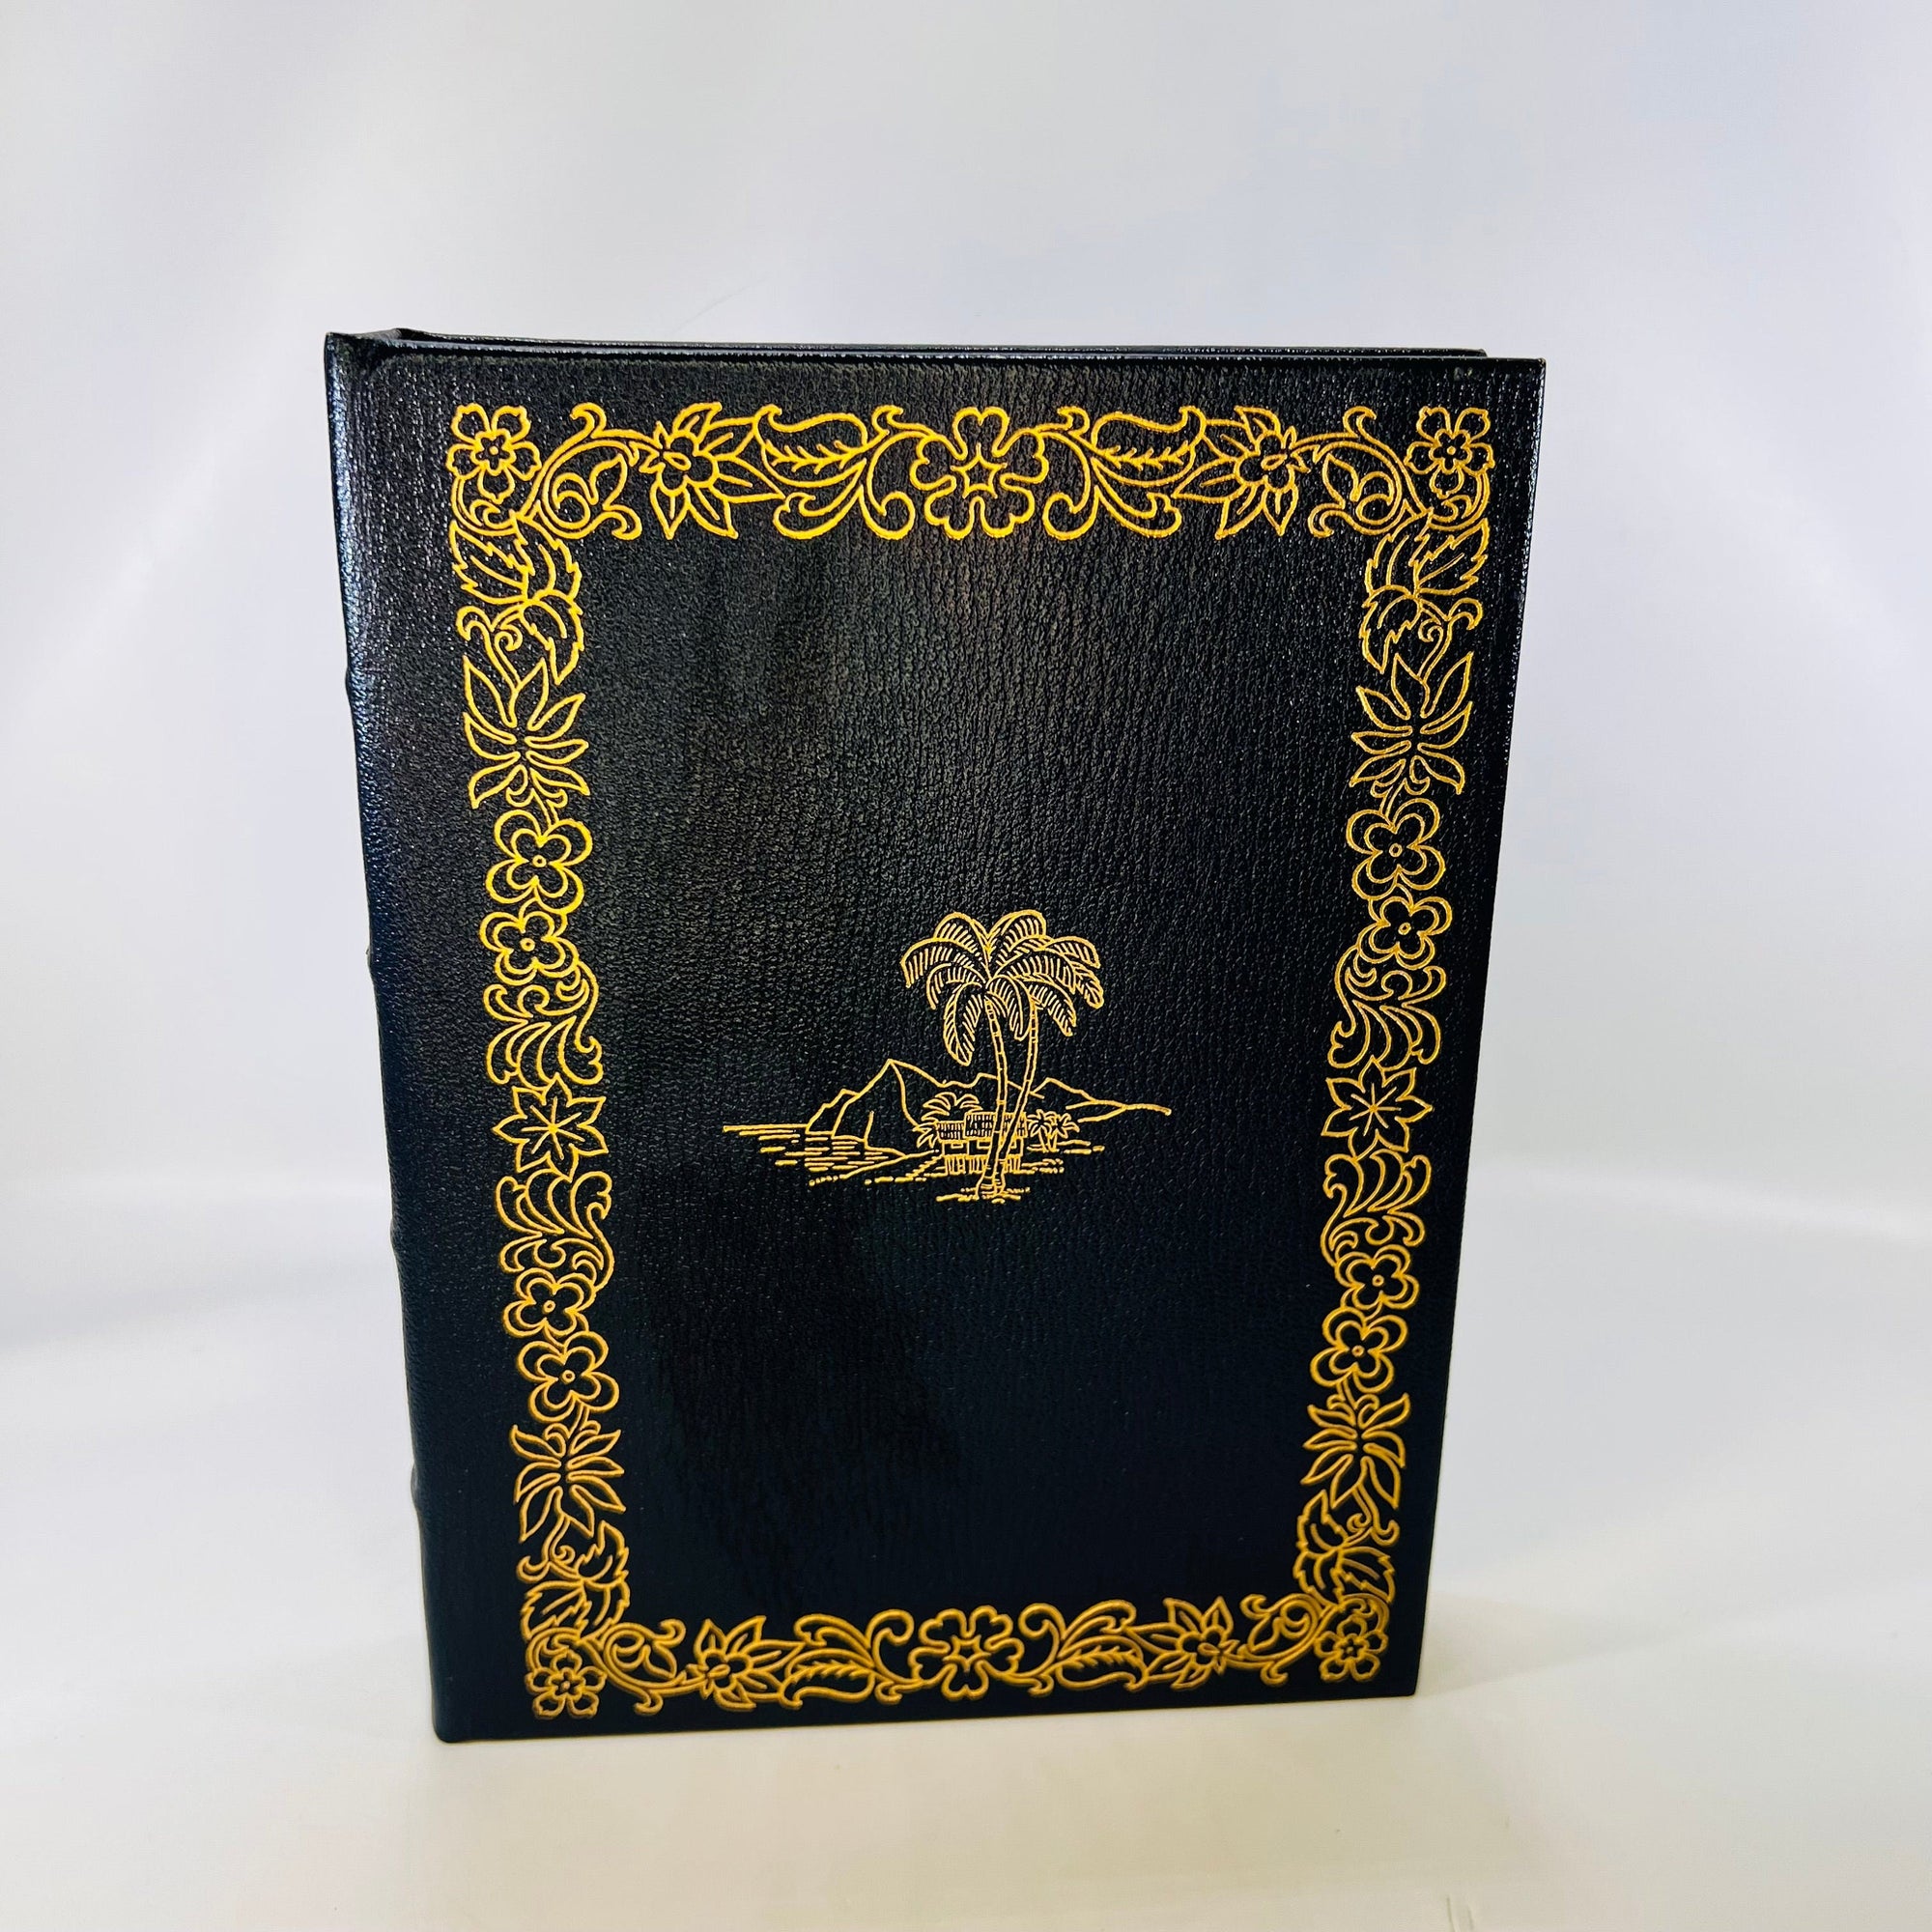 Lord Jim a Novel by Joseph Conrad 1977 Easton Press part of the 100 Greatest Books